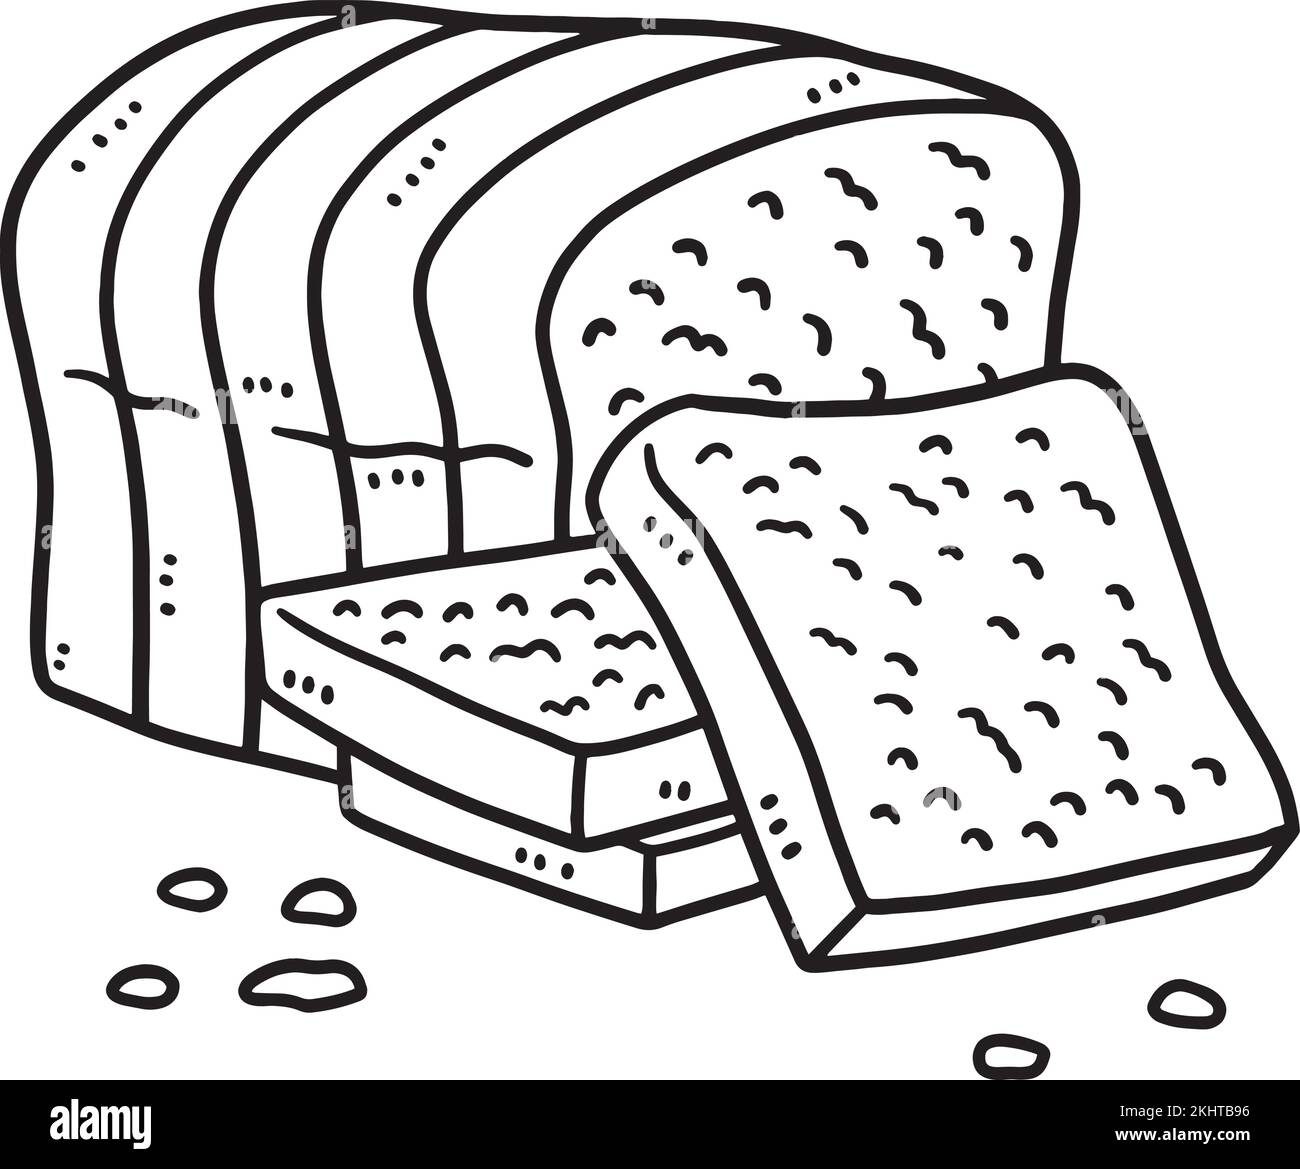 Slice loaf Black and White Stock Photos & Images - Alamy